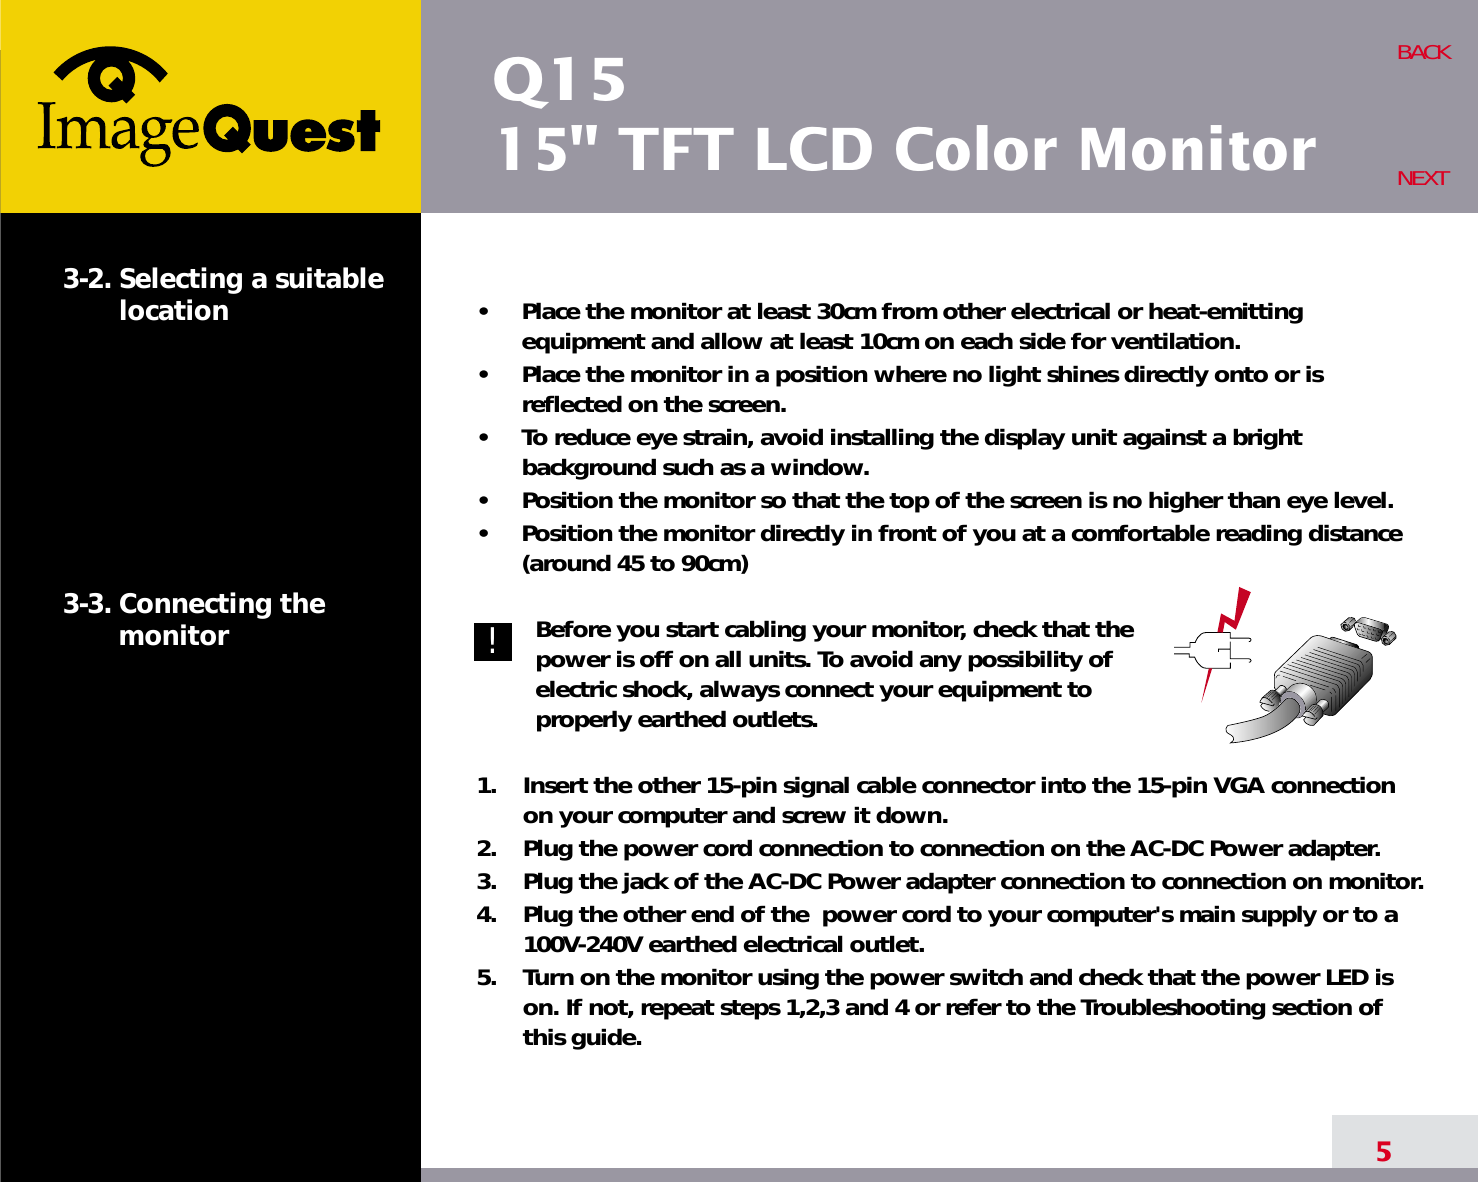 Q1515&quot; TFT LCD Color Monitor5BACKNEXT3-2. Selecting a suitablelocation3-3. Connecting the monitor•     Place the monitor at least 30cm from other electrical or heat-emittingequipment and allow at least 10cm on each side for ventilation.•     Place the monitor in a position where no light shines directly onto or isreflected on the screen.•     To reduce eye strain, avoid installing the display unit against a brightbackground such as a window.•     Position the monitor so that the top of the screen is no higher than eye level.•     Position the monitor directly in front of you at a comfortable reading distance(around 45 to 90cm) Before you start cabling your monitor, check that thepower is off on all units. To avoid any possibility ofelectric shock, always connect your equipment toproperly earthed outlets.1.    Insert the other 15-pin signal cable connector into the 15-pin VGA connectionon your computer and screw it down. 2.    Plug the power cord connection to connection on the AC-DC Power adapter.3.    Plug the jack of the AC-DC Power adapter connection to connection on monitor.4.    Plug the other end of the  power cord to your computer&apos;s main supply or to a100V-240V earthed electrical outlet.5.    Turn on the monitor using the power switch and check that the power LED ison. If not, repeat steps 1,2,3 and 4 or refer to the Troubleshooting section ofthis guide.!!